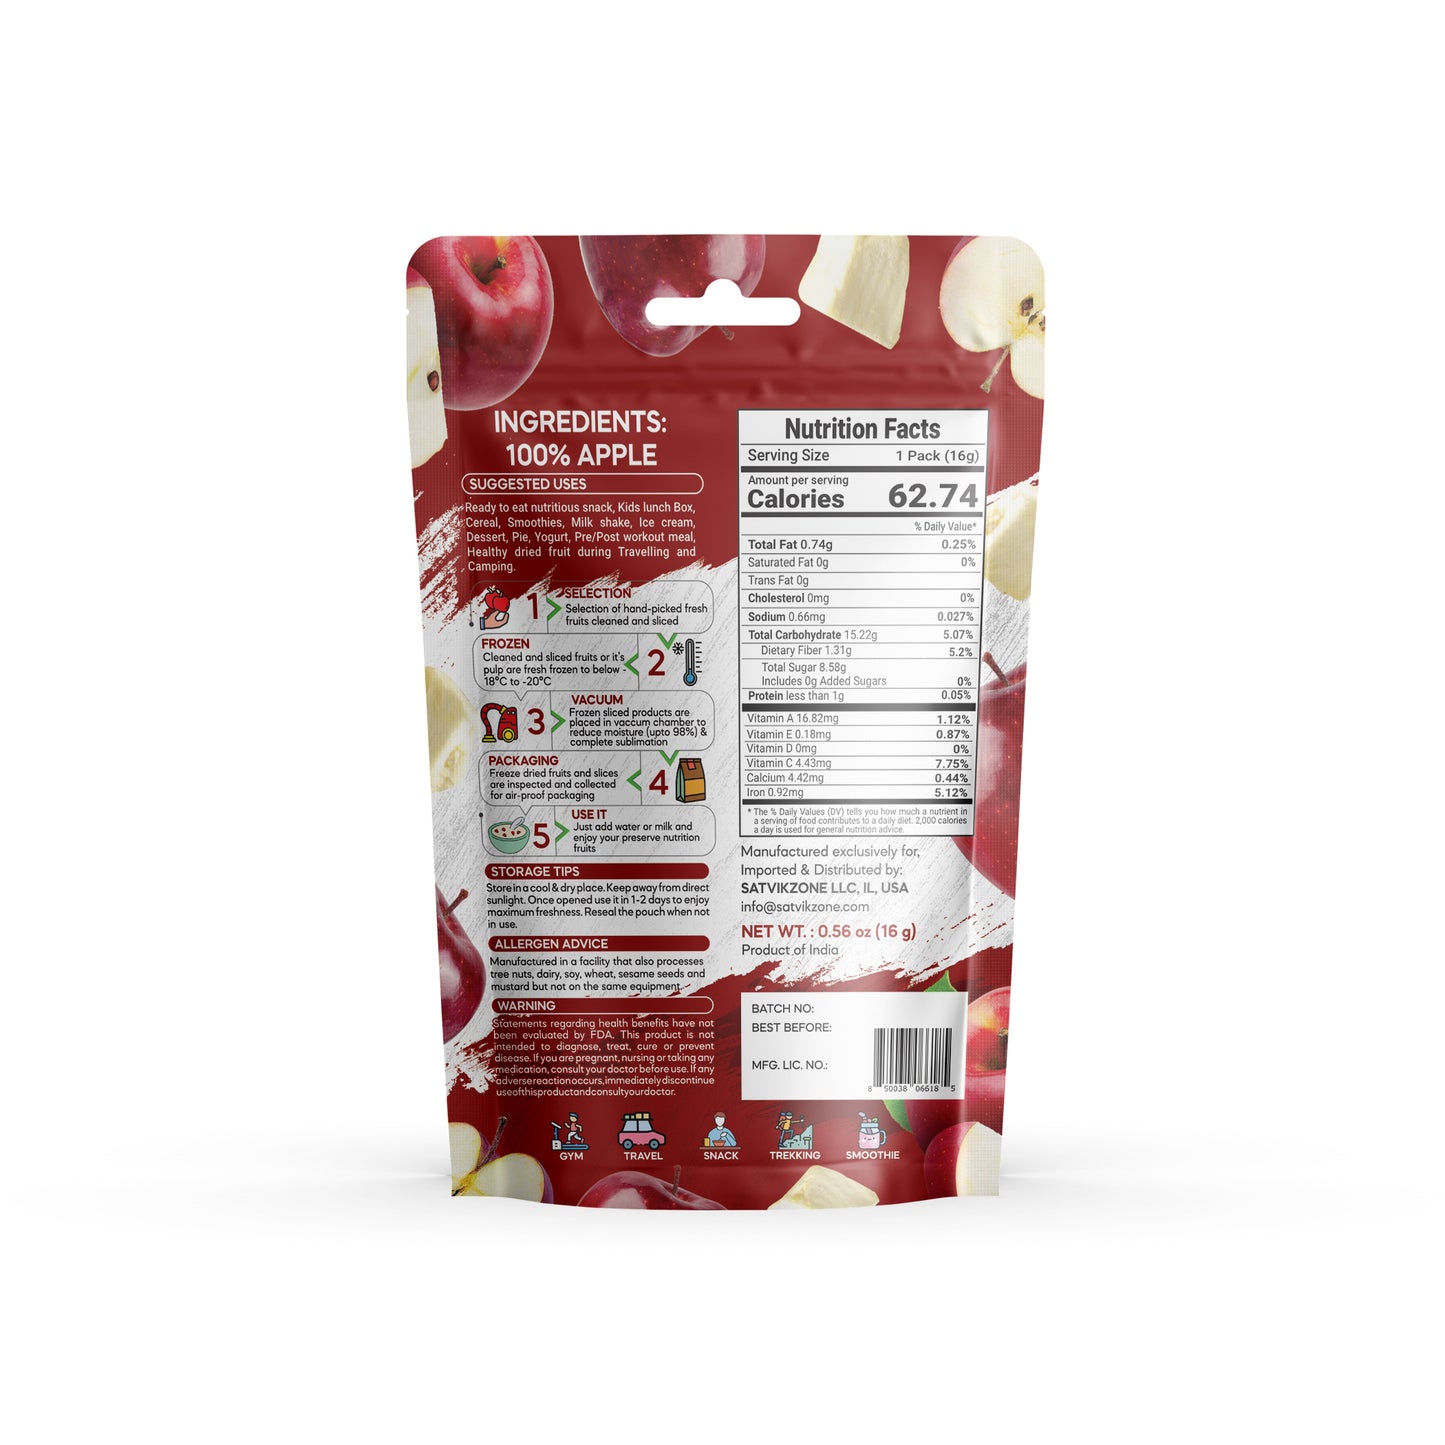 Freeze Dried Apple, 100% Natural, Ready-to-Eat Fruit Snack, Vegan, Non GMO, No added Sugars